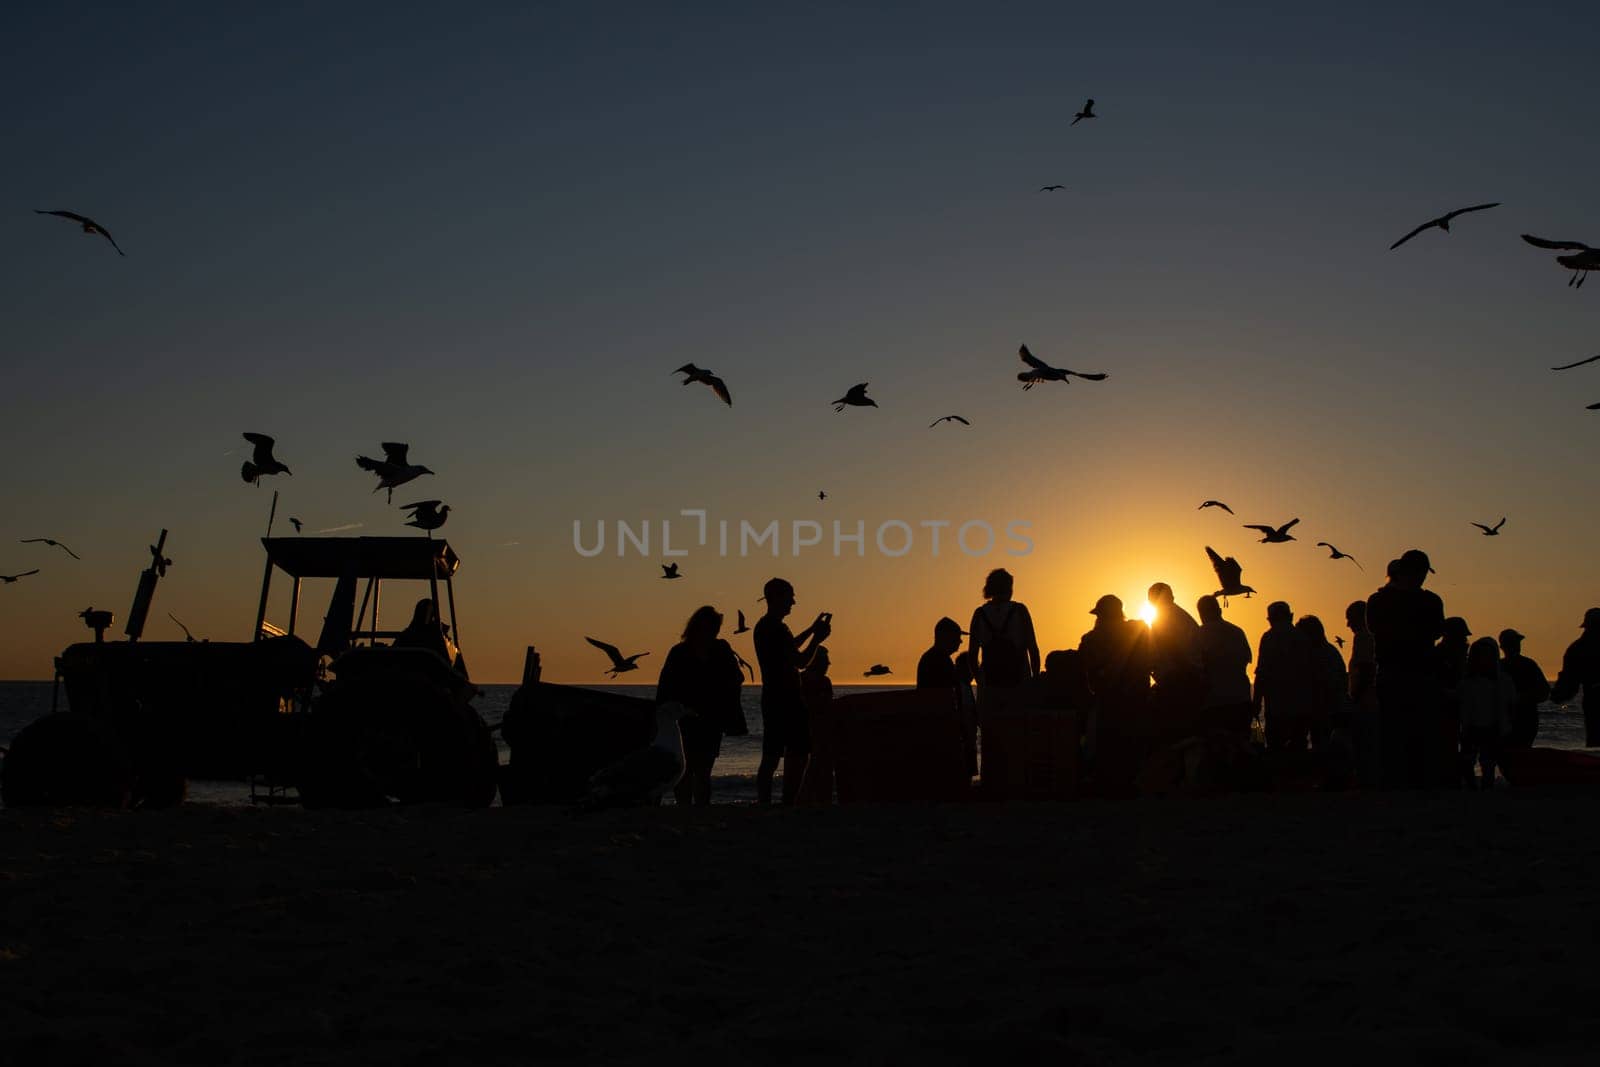 Seagulls fly over the sea at sunset - people are standing on the shore by the tractor by Studia72